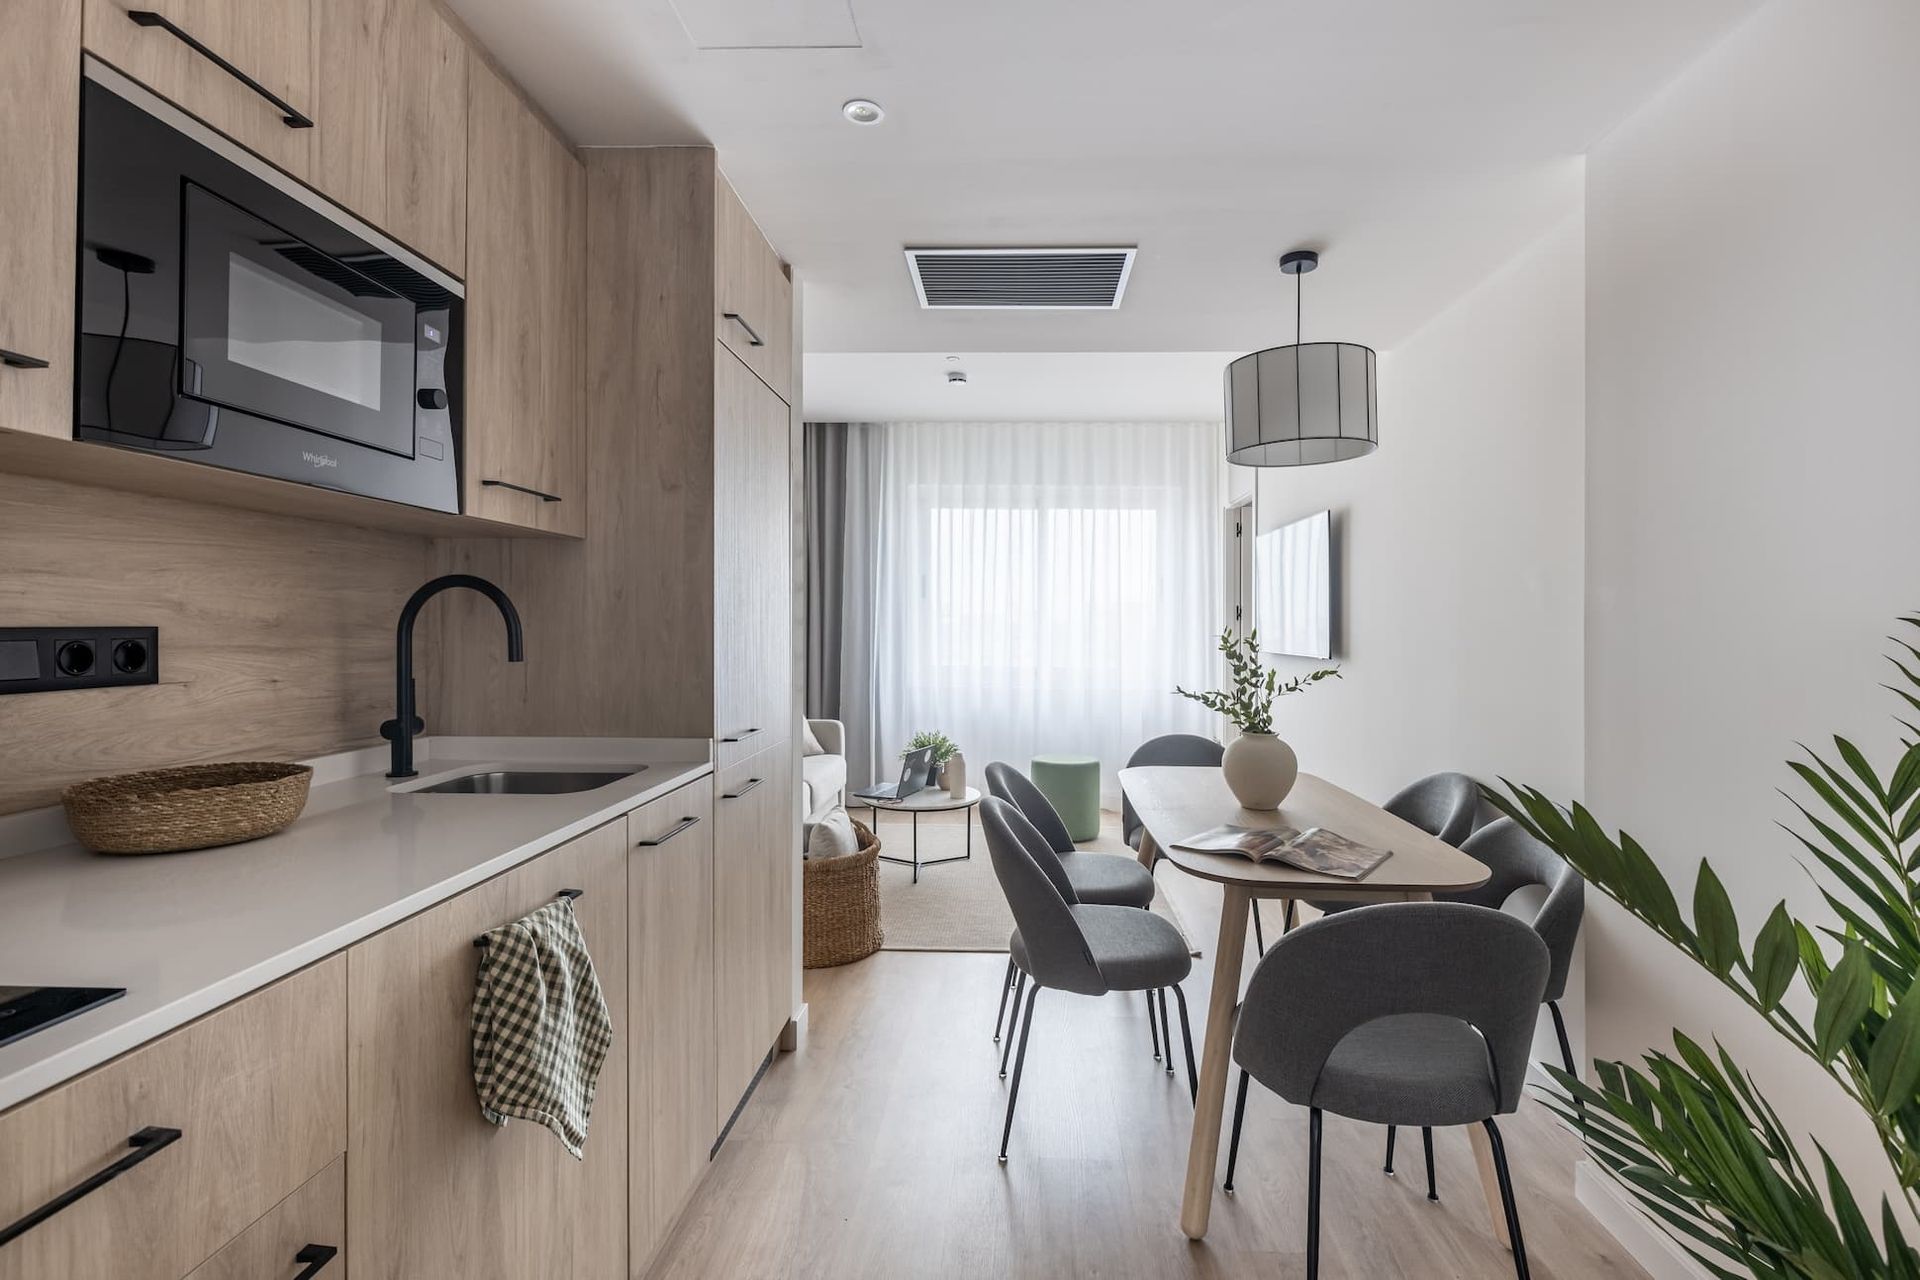 2 bedroom apartment in Madrid Chamberí